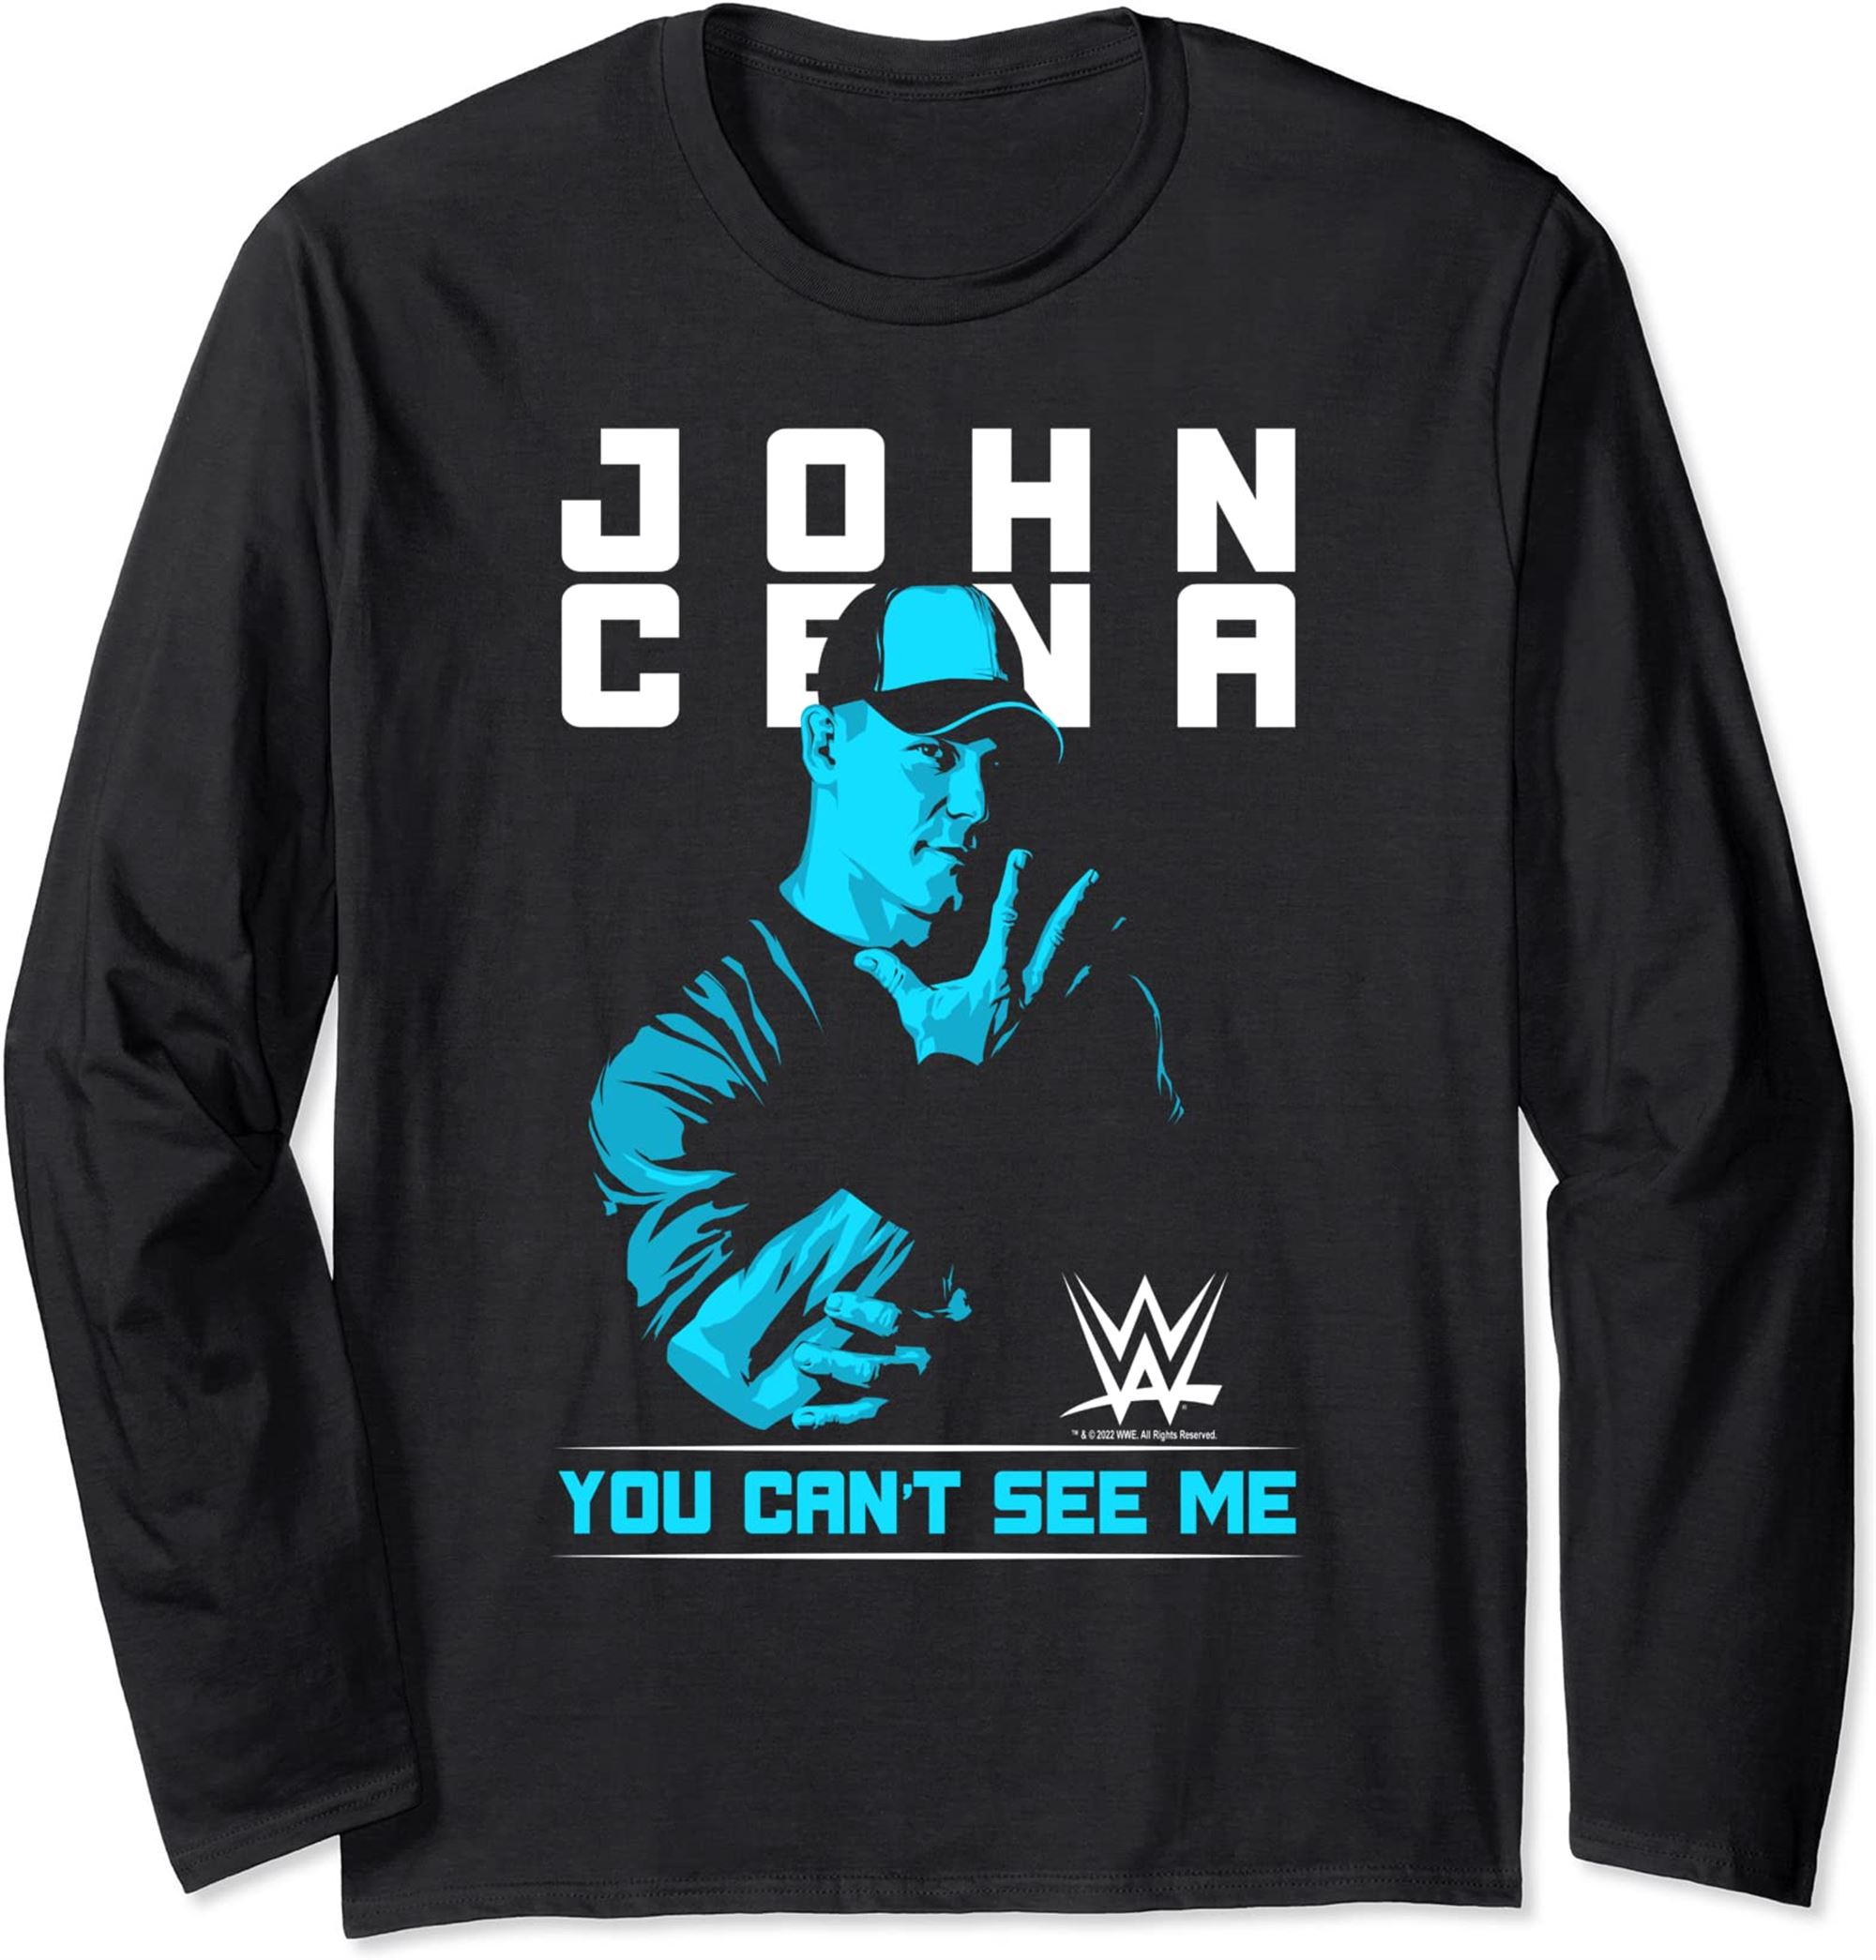 Wwe John Cena You Cant See Me Long Sleeve T-shirt Full Size Up To 5xl